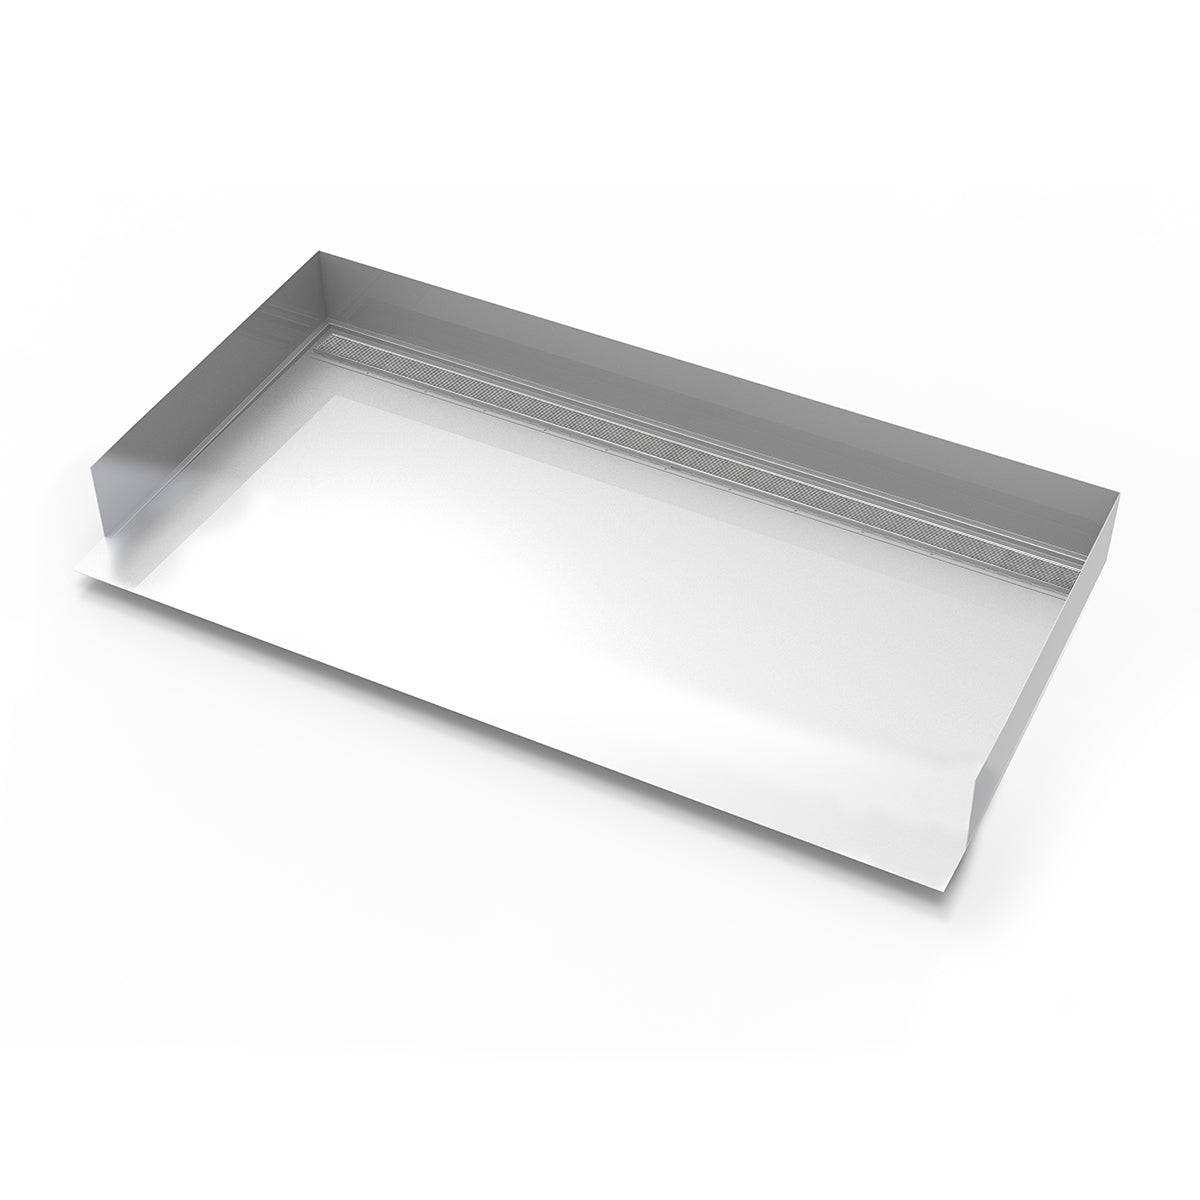 Infinity Drain 30"x 60" Curbless Stainless Steel Shower Base with Back Wall Wedge Wire Linear Drain location